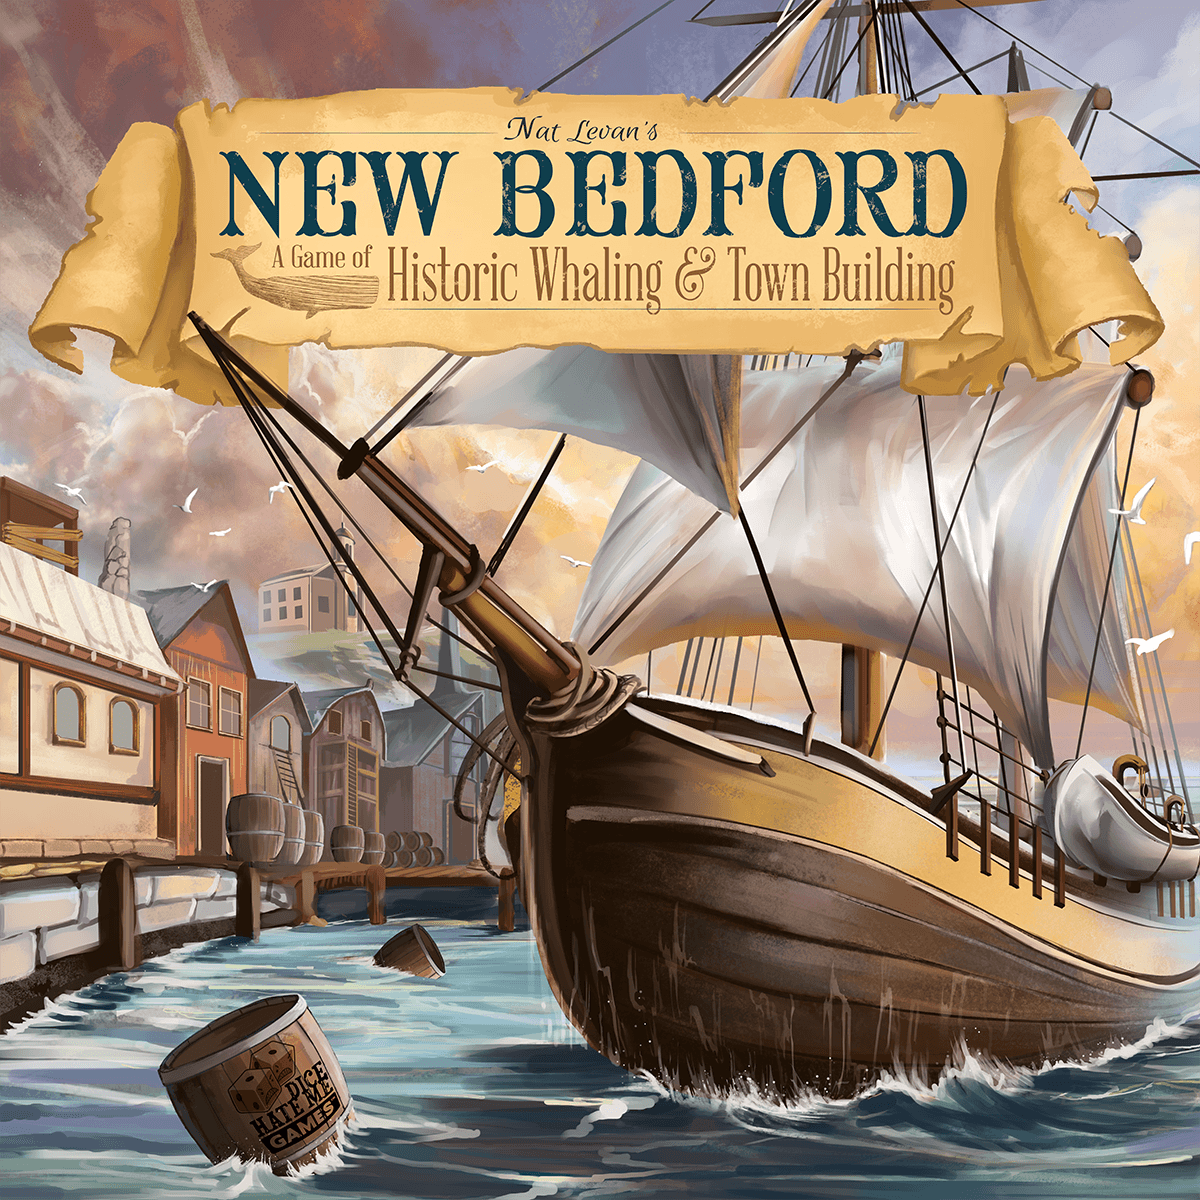 New Bedford (Retail Edition) Retail Board Game Dice Hate Me Games 0798304339208 KS800713A